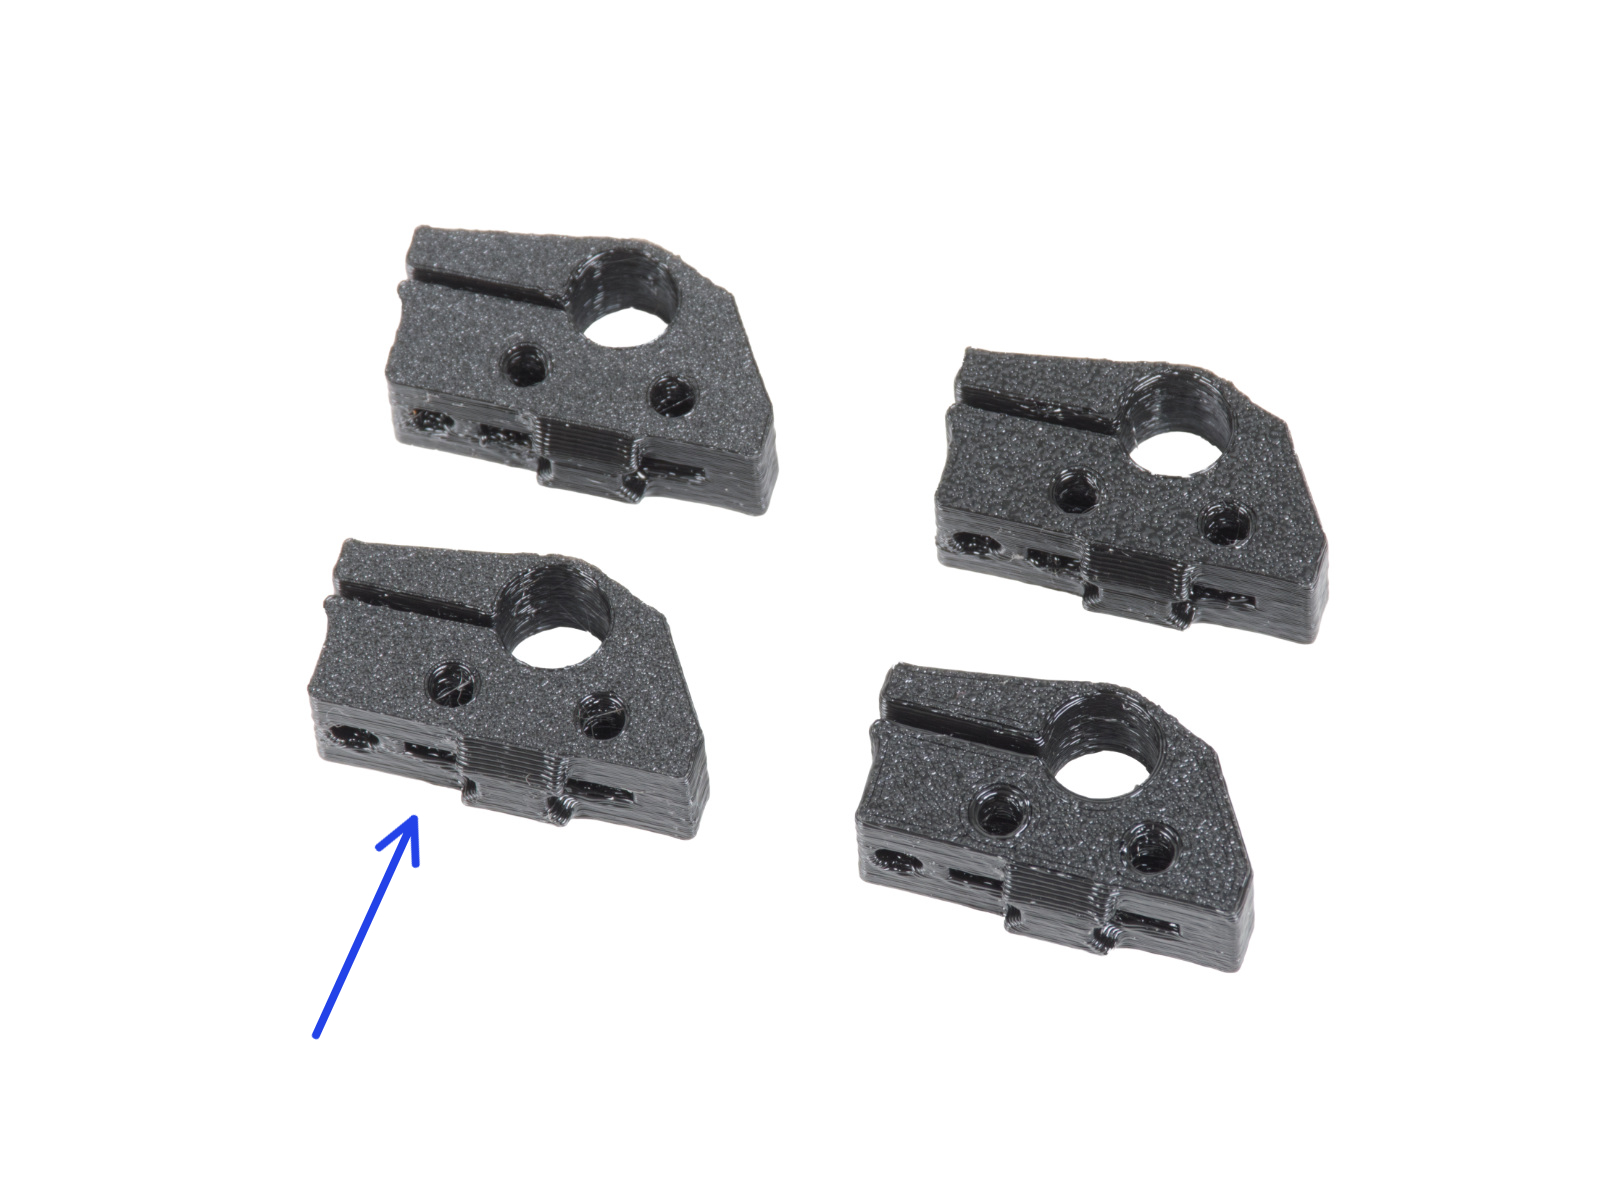 Y-axis (new): smooth rods holders